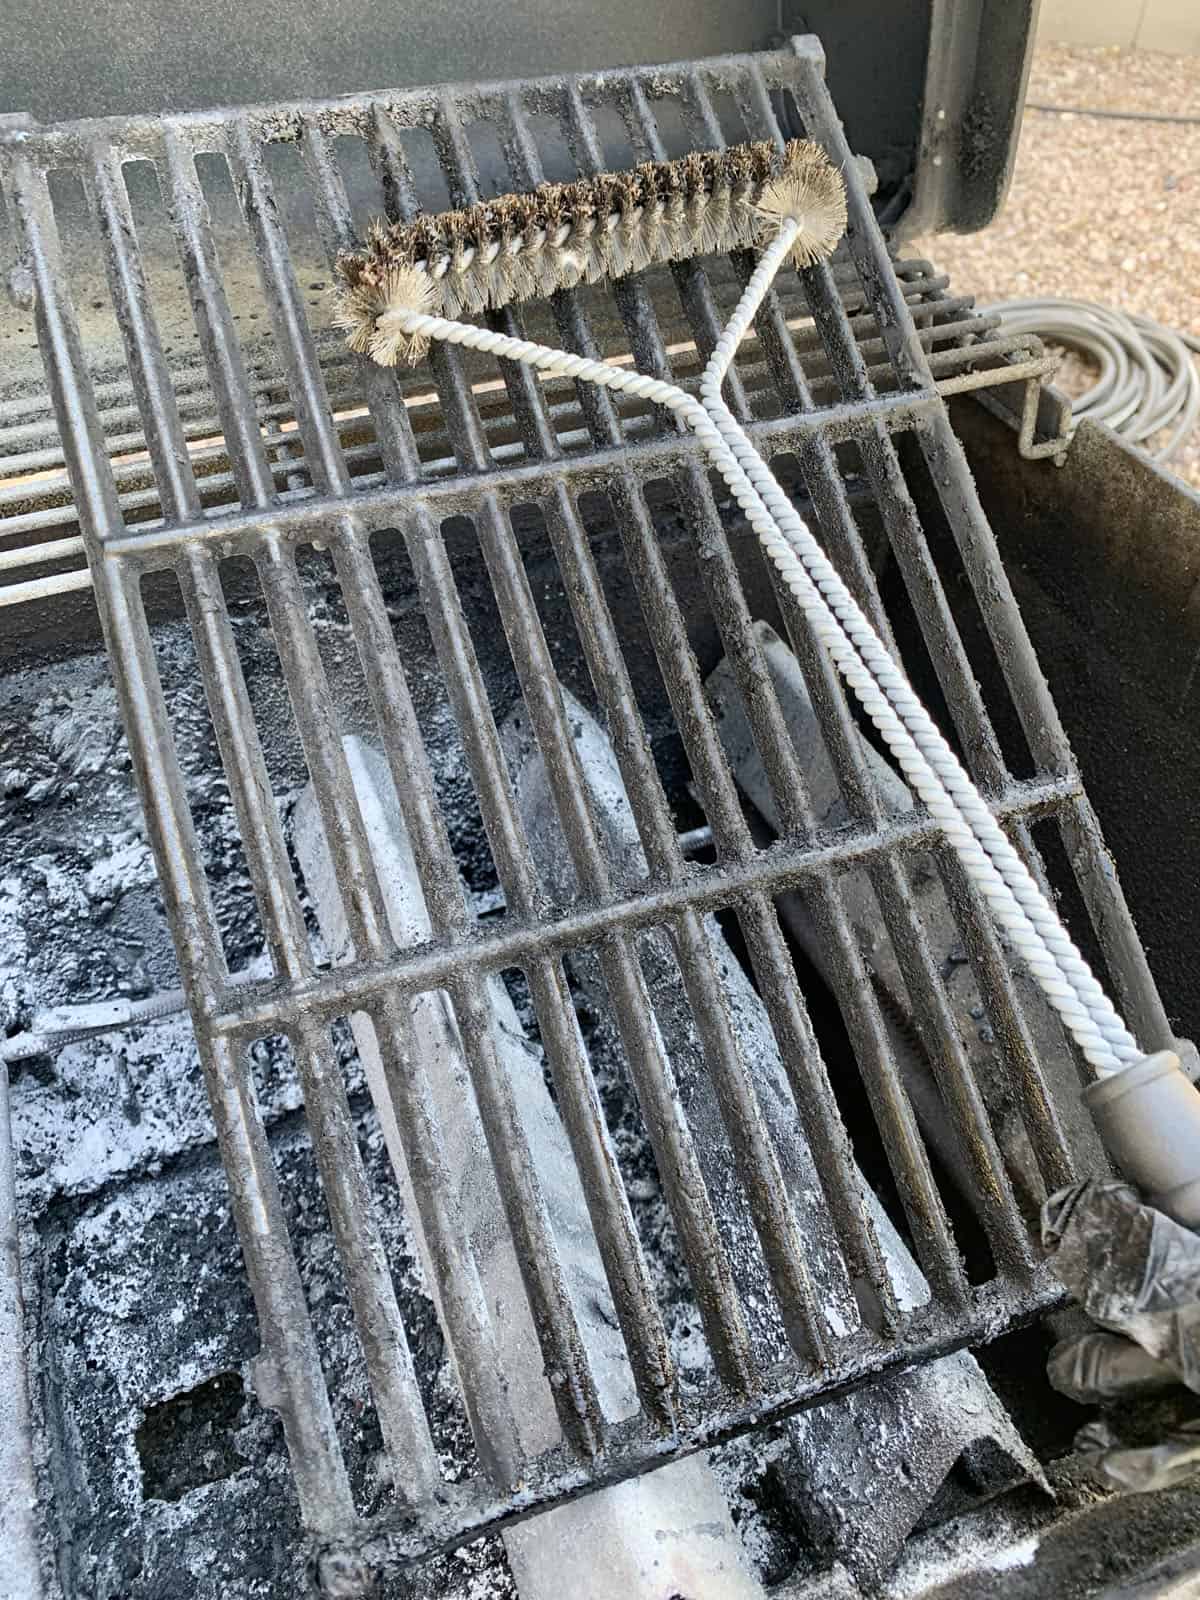 Cleaning grill grates with wire brush